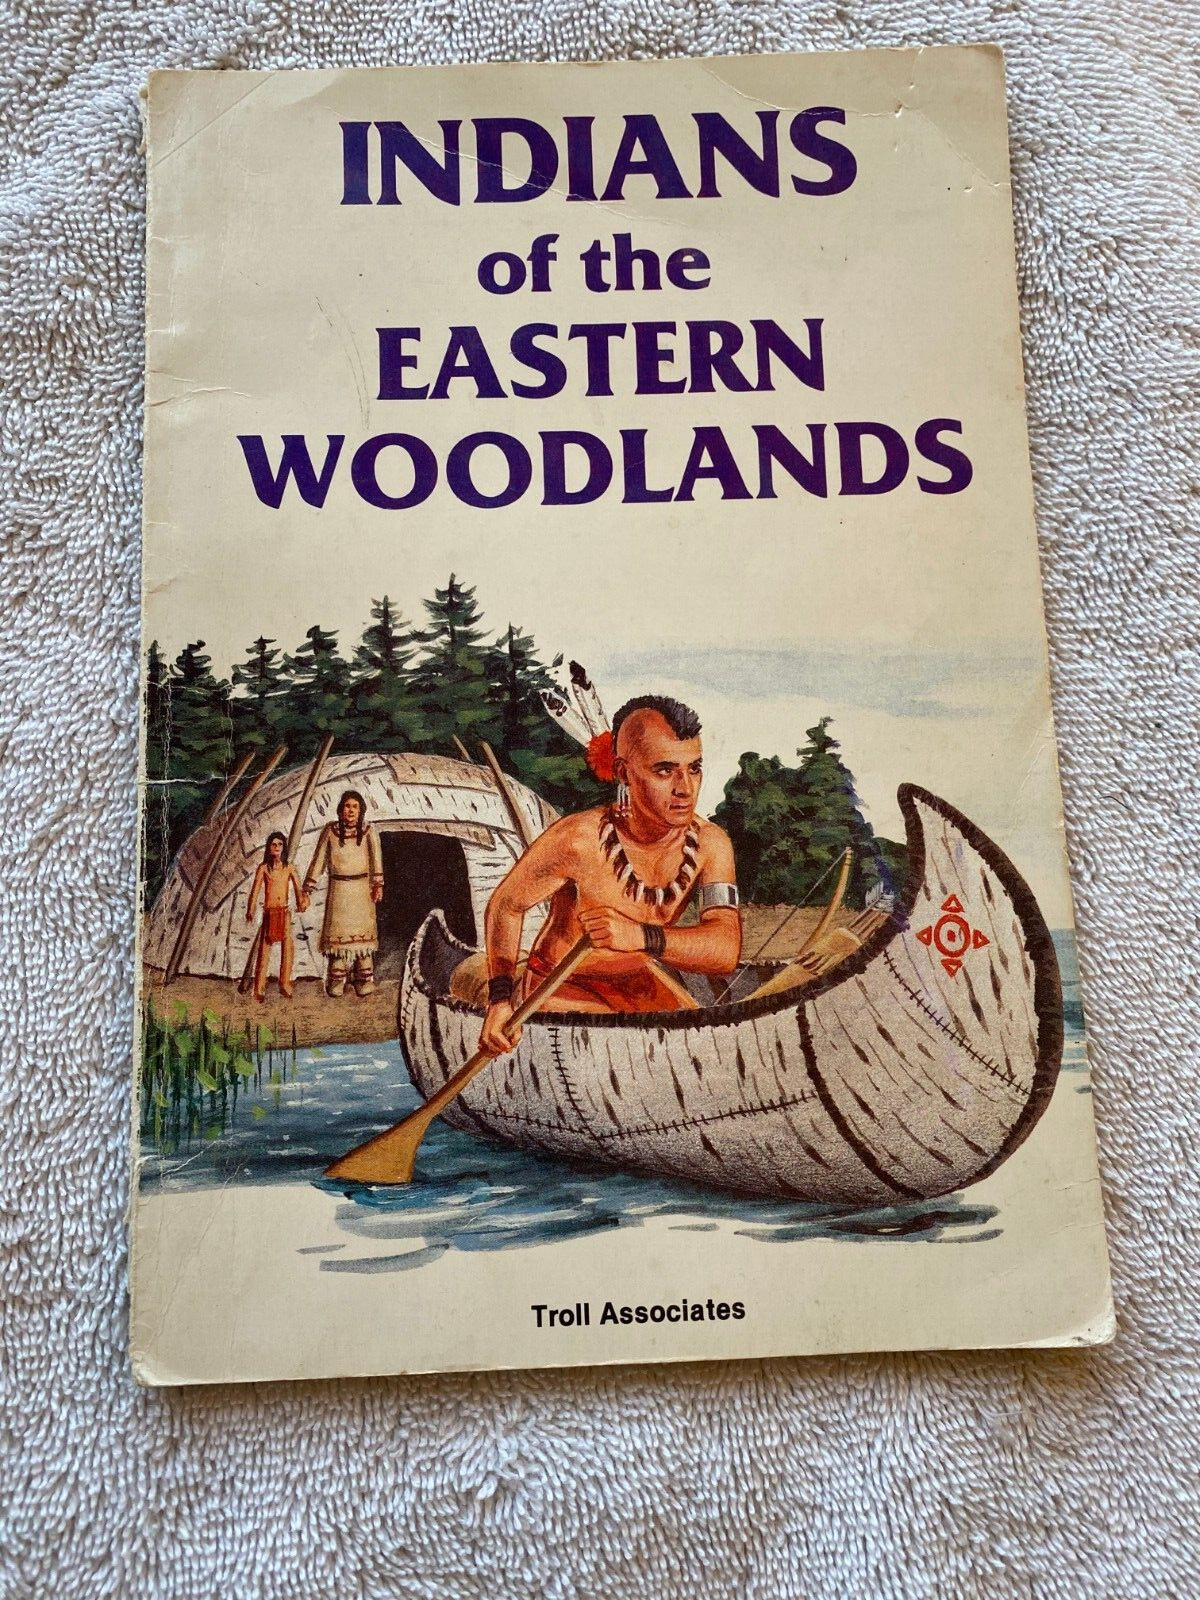 Indians of the Eastern Woodlands (United States) Troll Assoc. by Rae Bains, Ill.